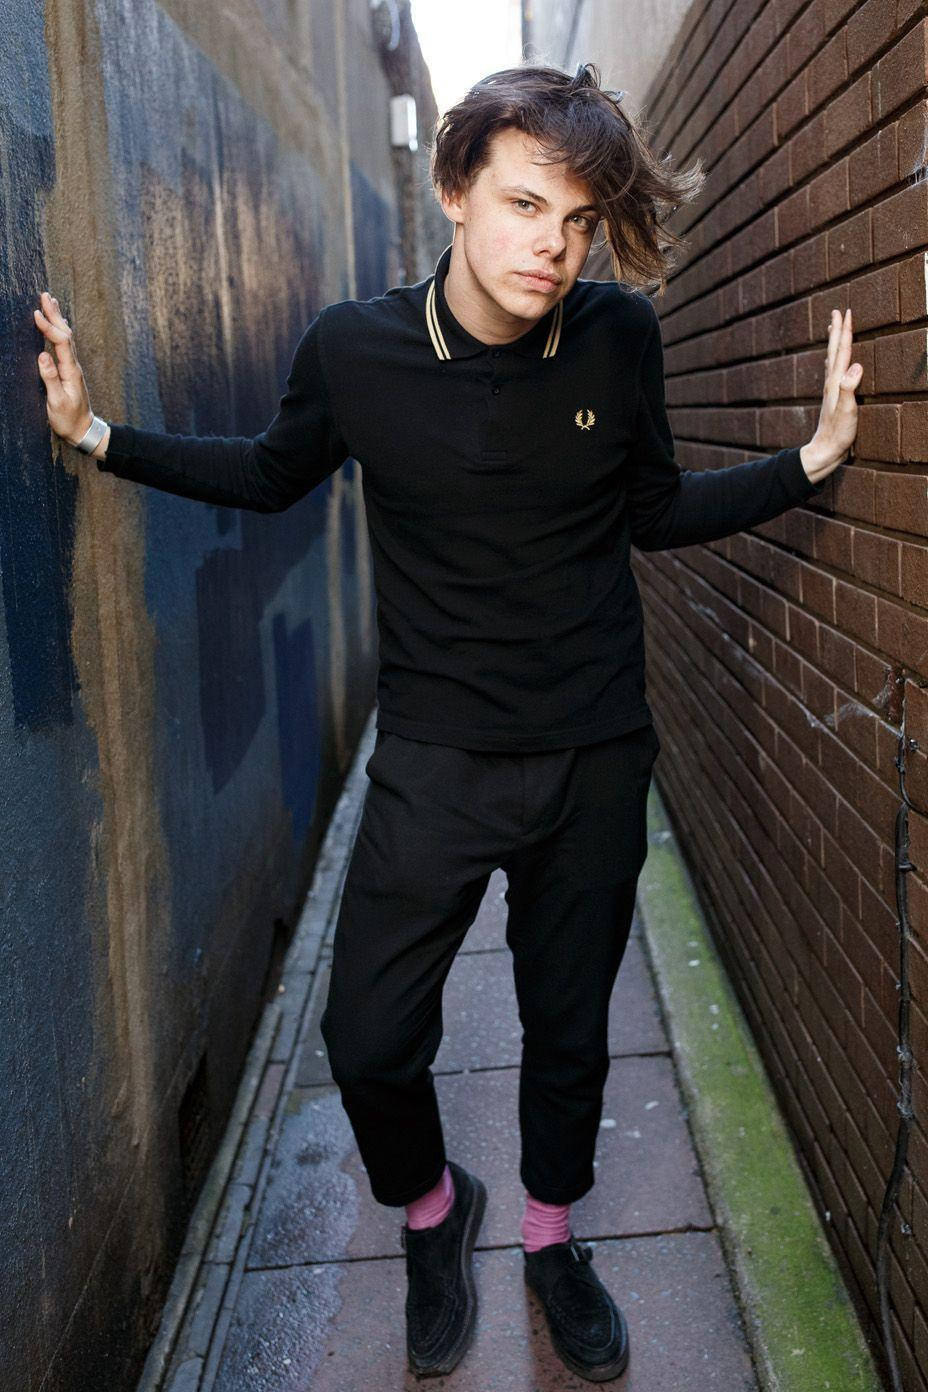 A Young Man In Black Standing In A Alleyway Wallpaper